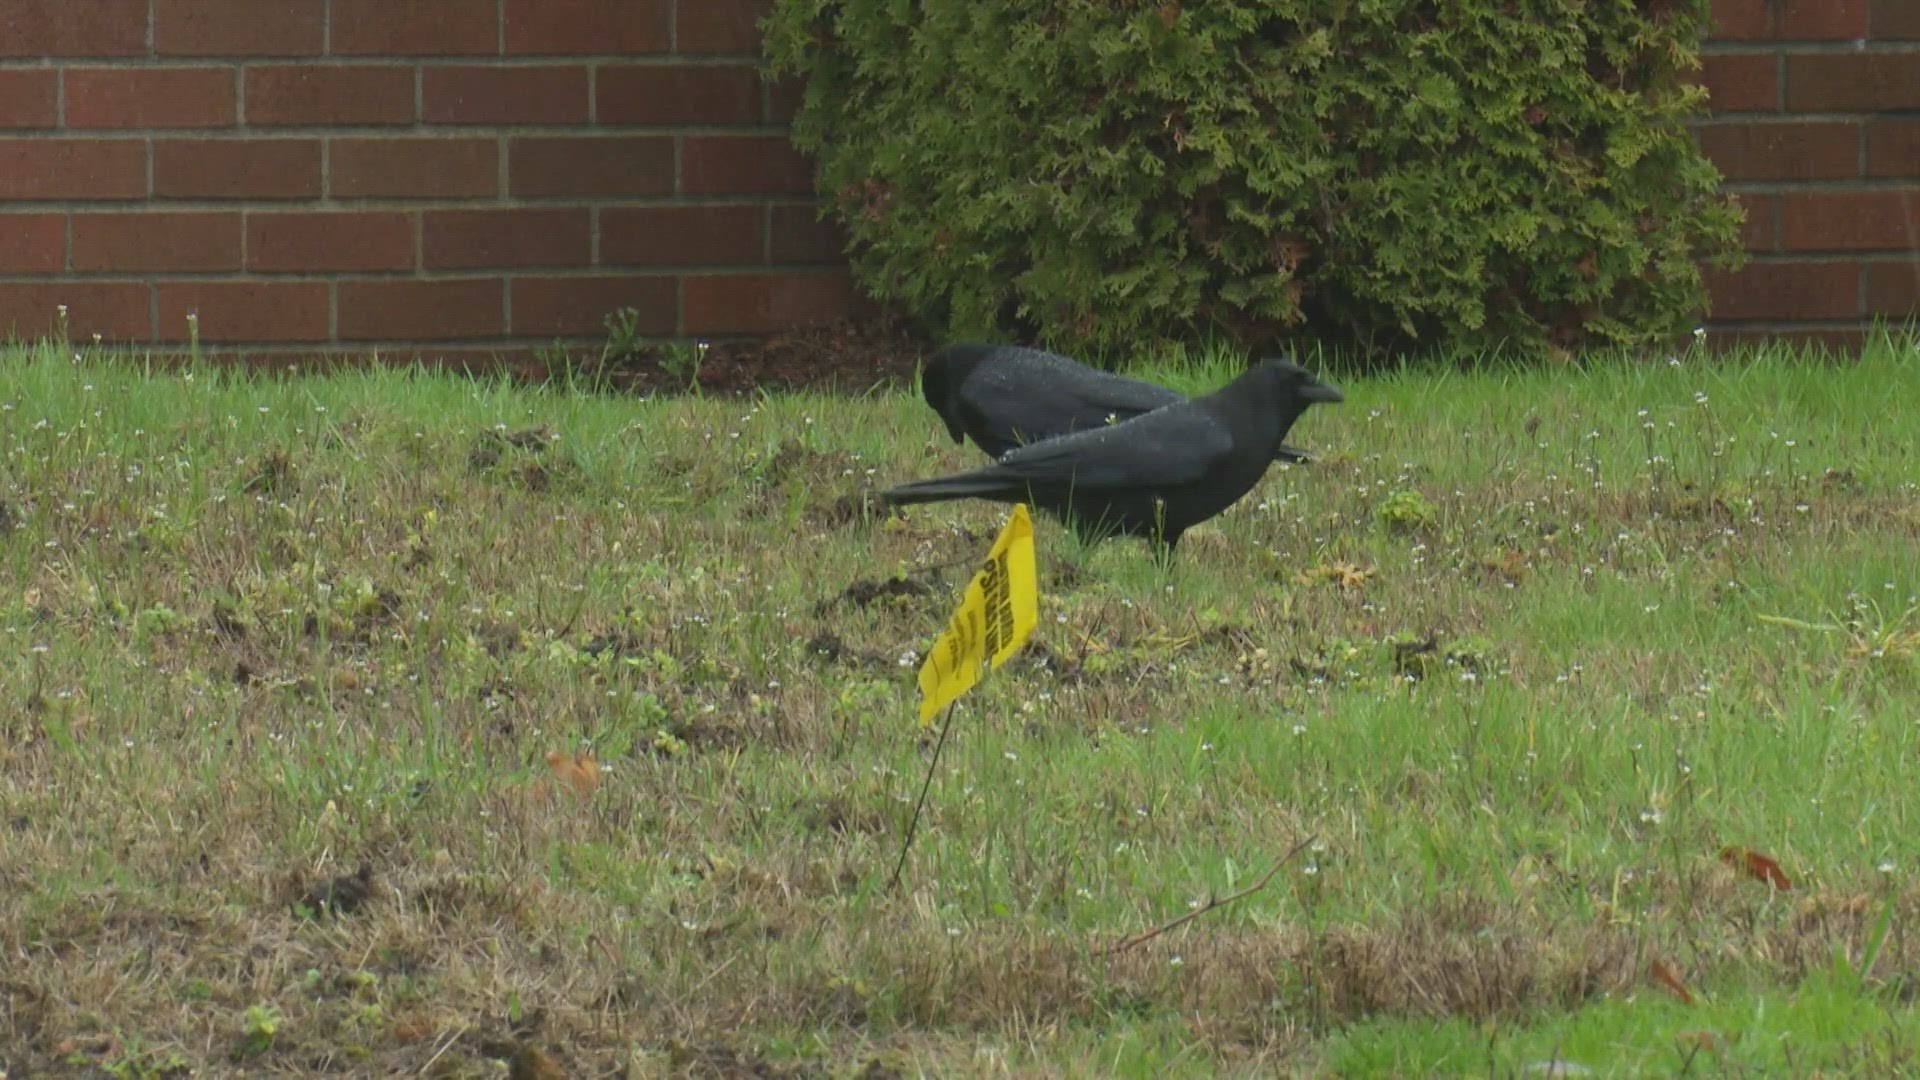 While residents are upset with the mess crows are making in their lawns, experts say it could be good in the long run. Here's why.